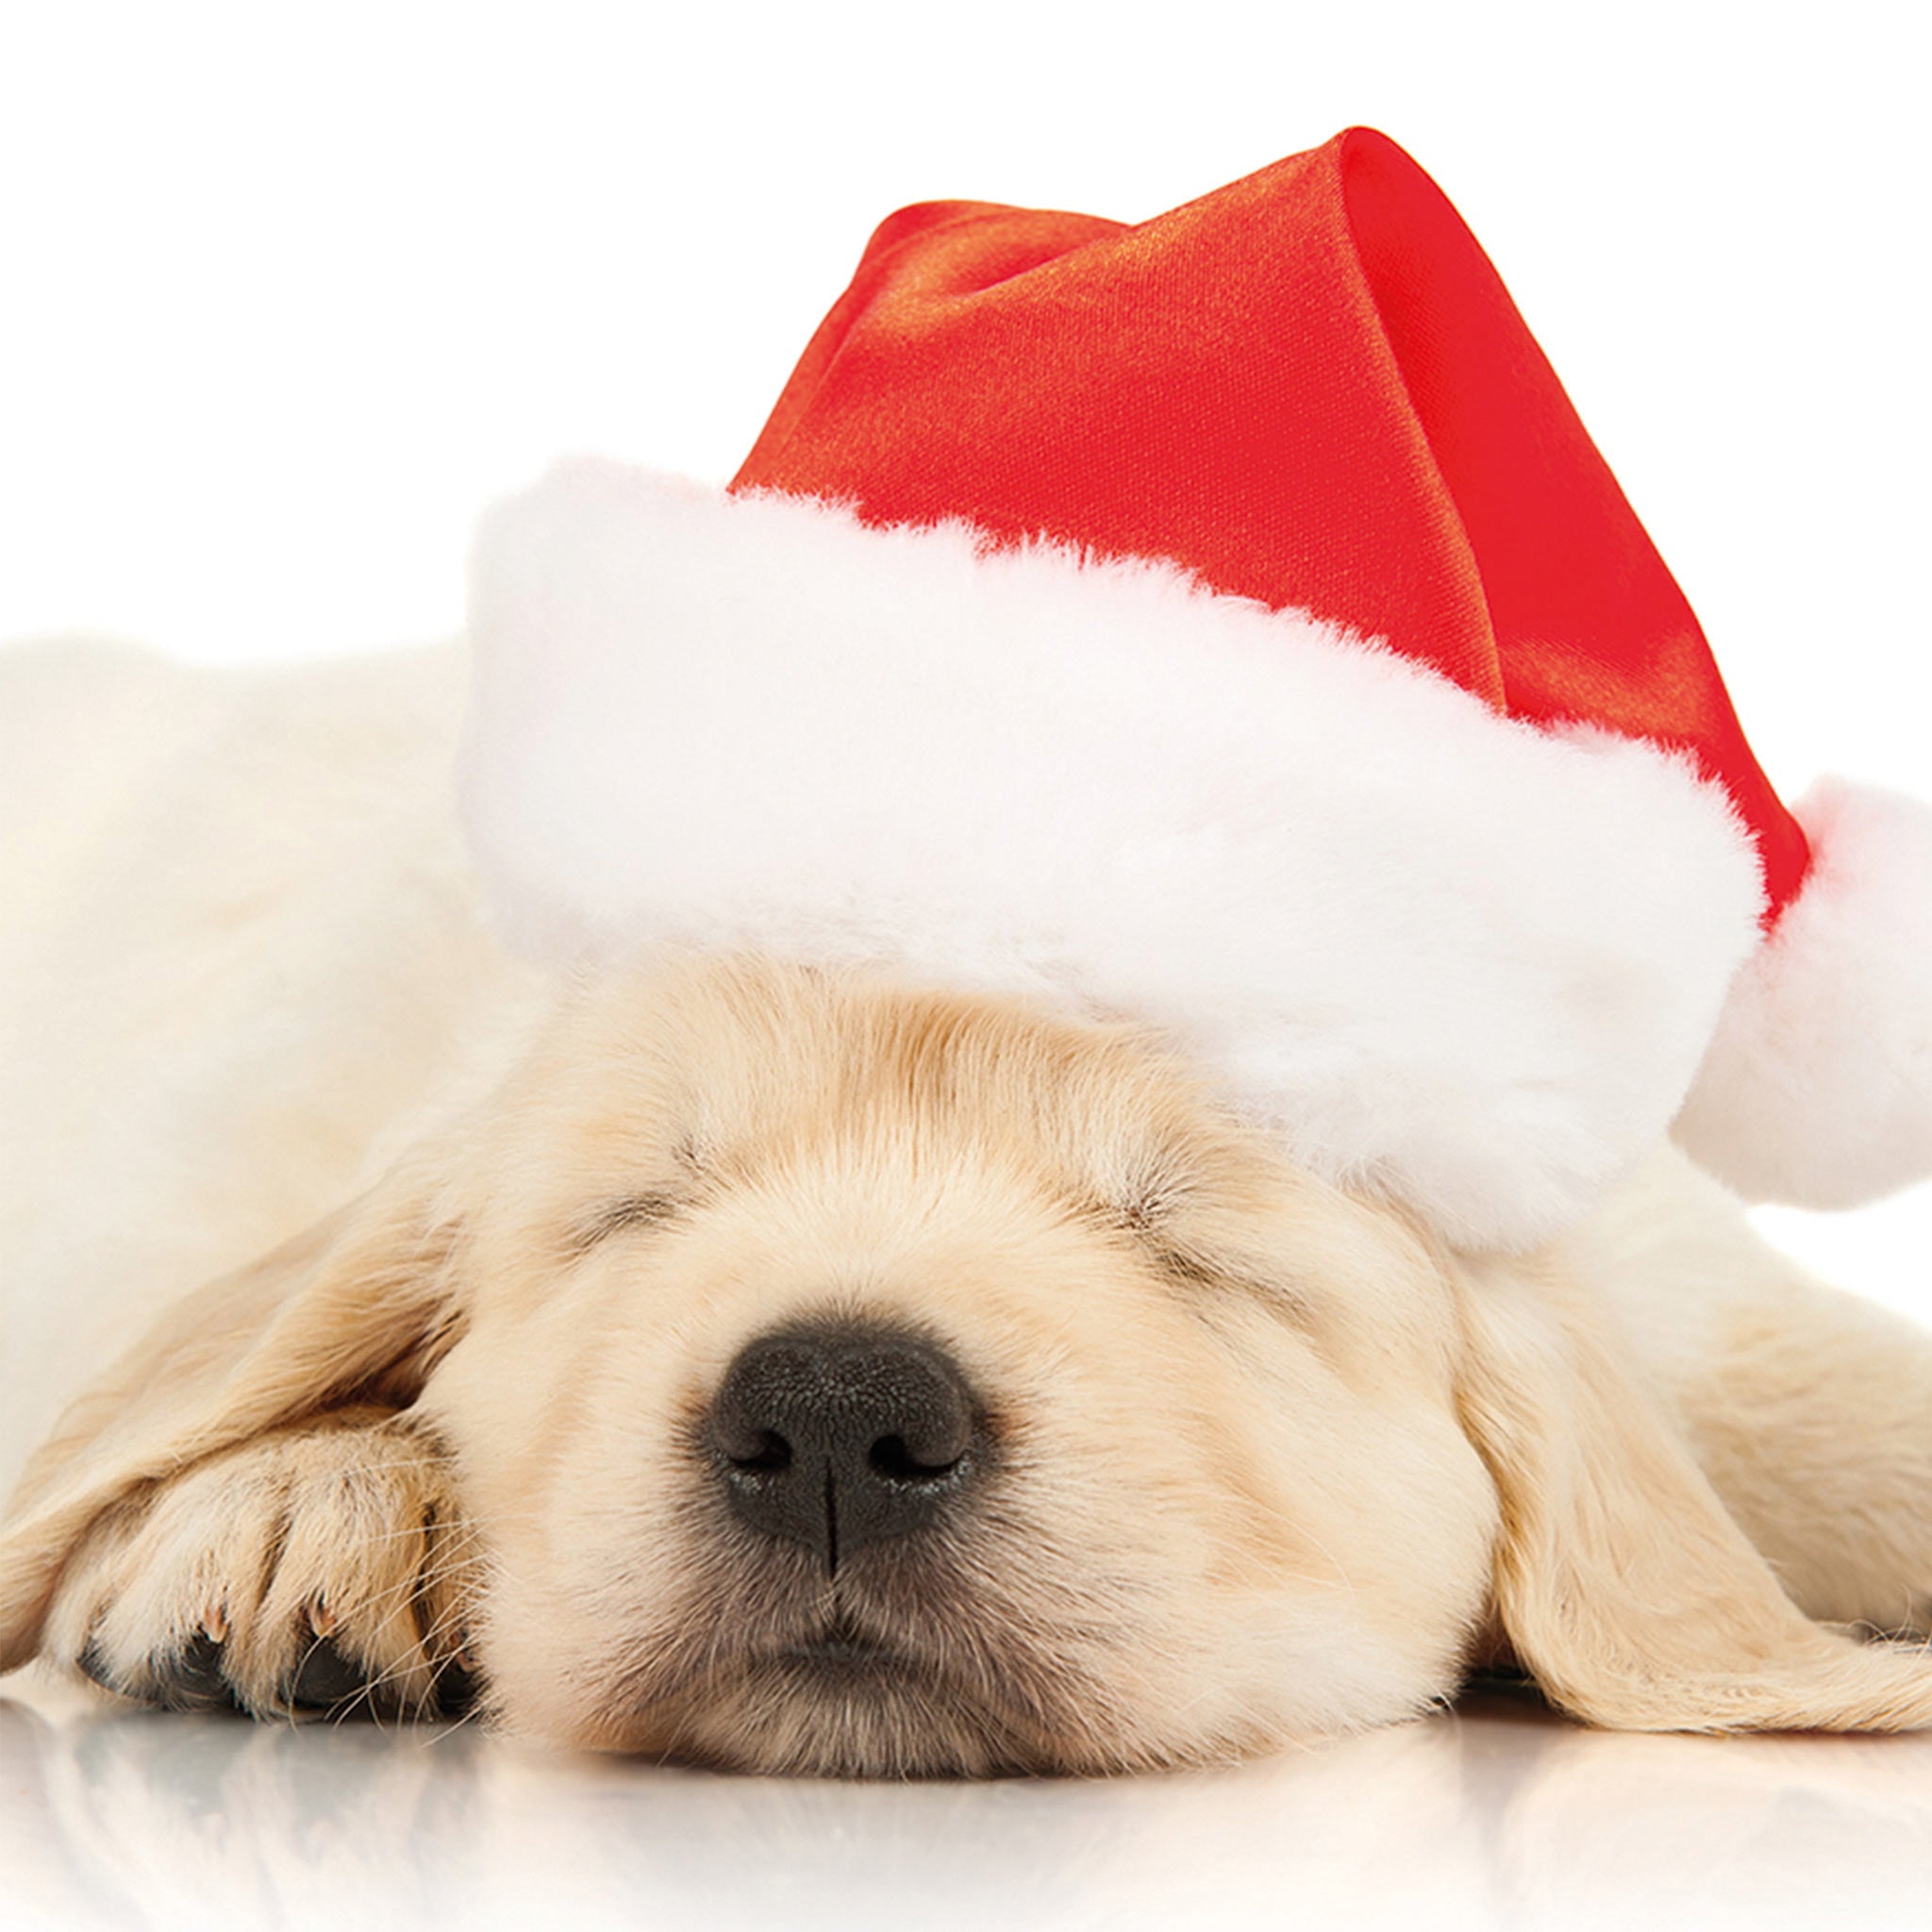 The design on this Christmas card is a photograph of a Labrador puppy, sleeping under a Santa hat 